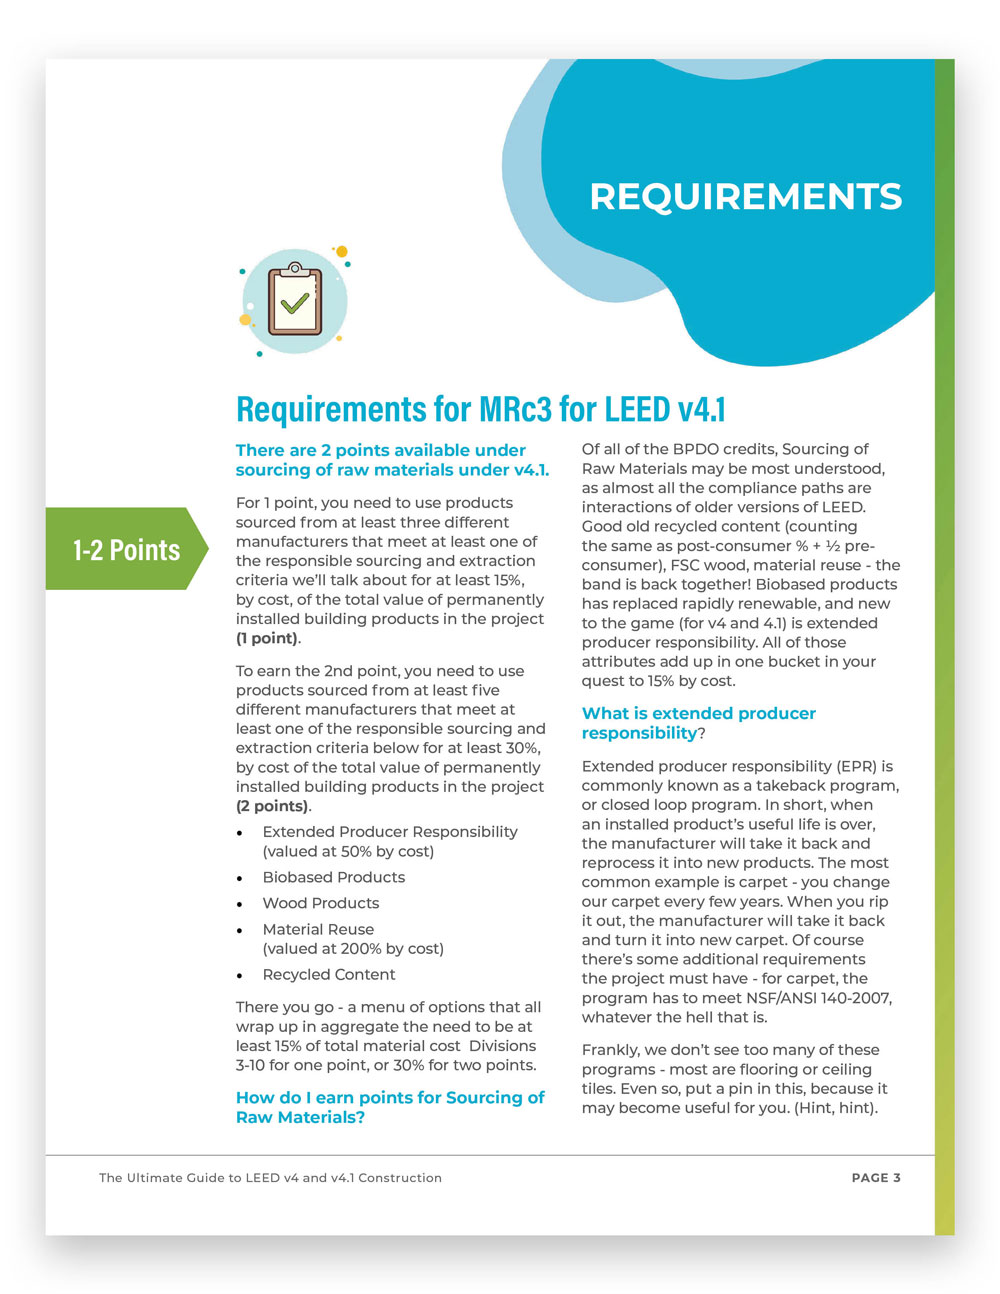 Sourcing of Raw Materials LEED Requirements